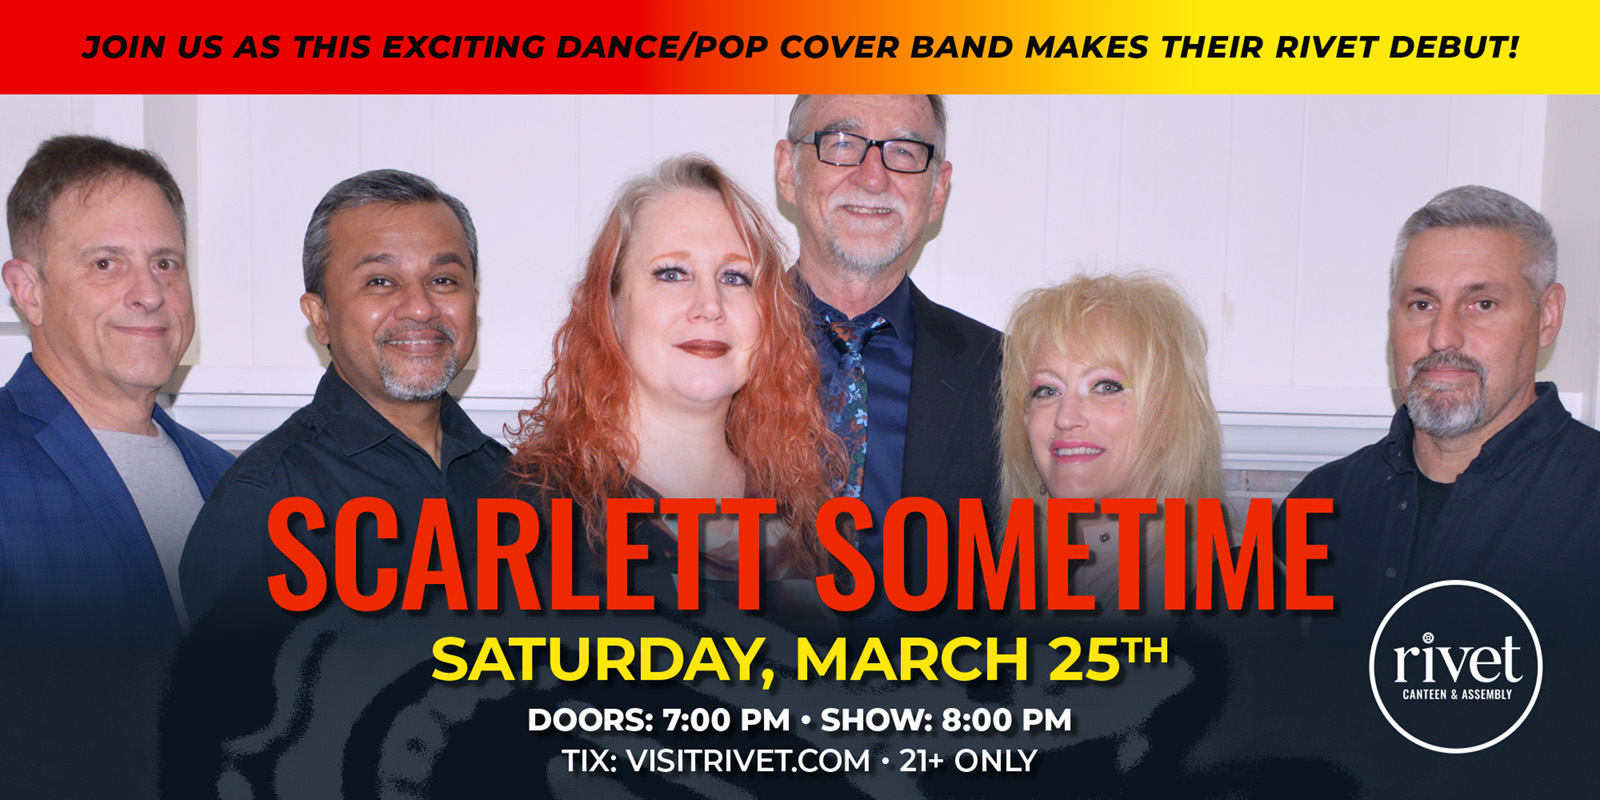 Scarlett Sometime makes their live debut at Rivet: Canteen & Assembly on Saturday, March 25, 2023. Join us!